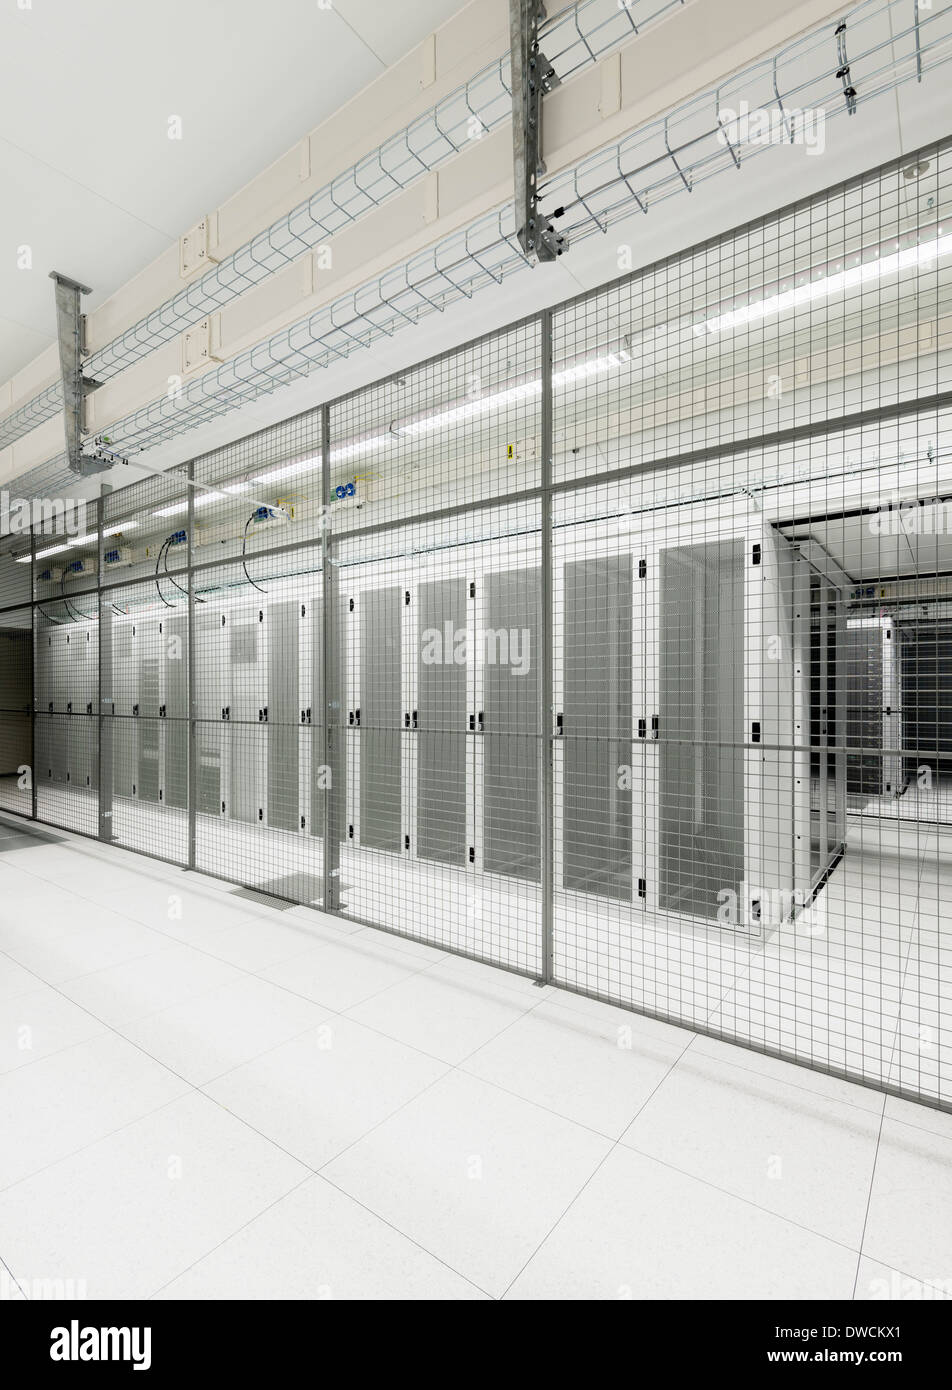 Fenced off section in data storage warehouse Stock Photo